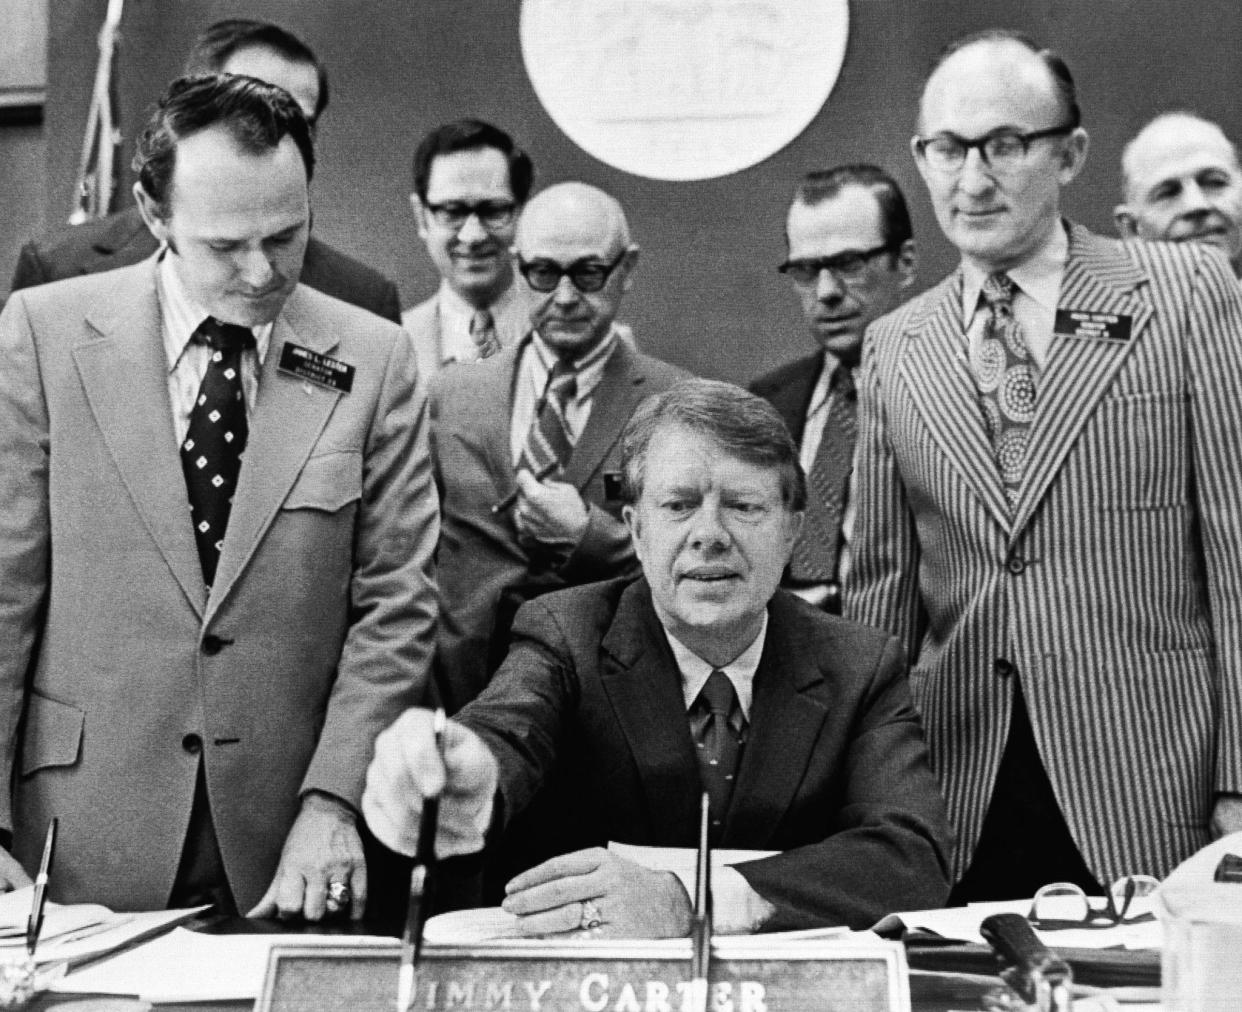 Gov. Jimmy Carter prepares to sign a Georgia Senate House resolution opposing forced busing to achieve integration in the classrooms of the U.S. on Feb. 25, 1972, in Atlanta.